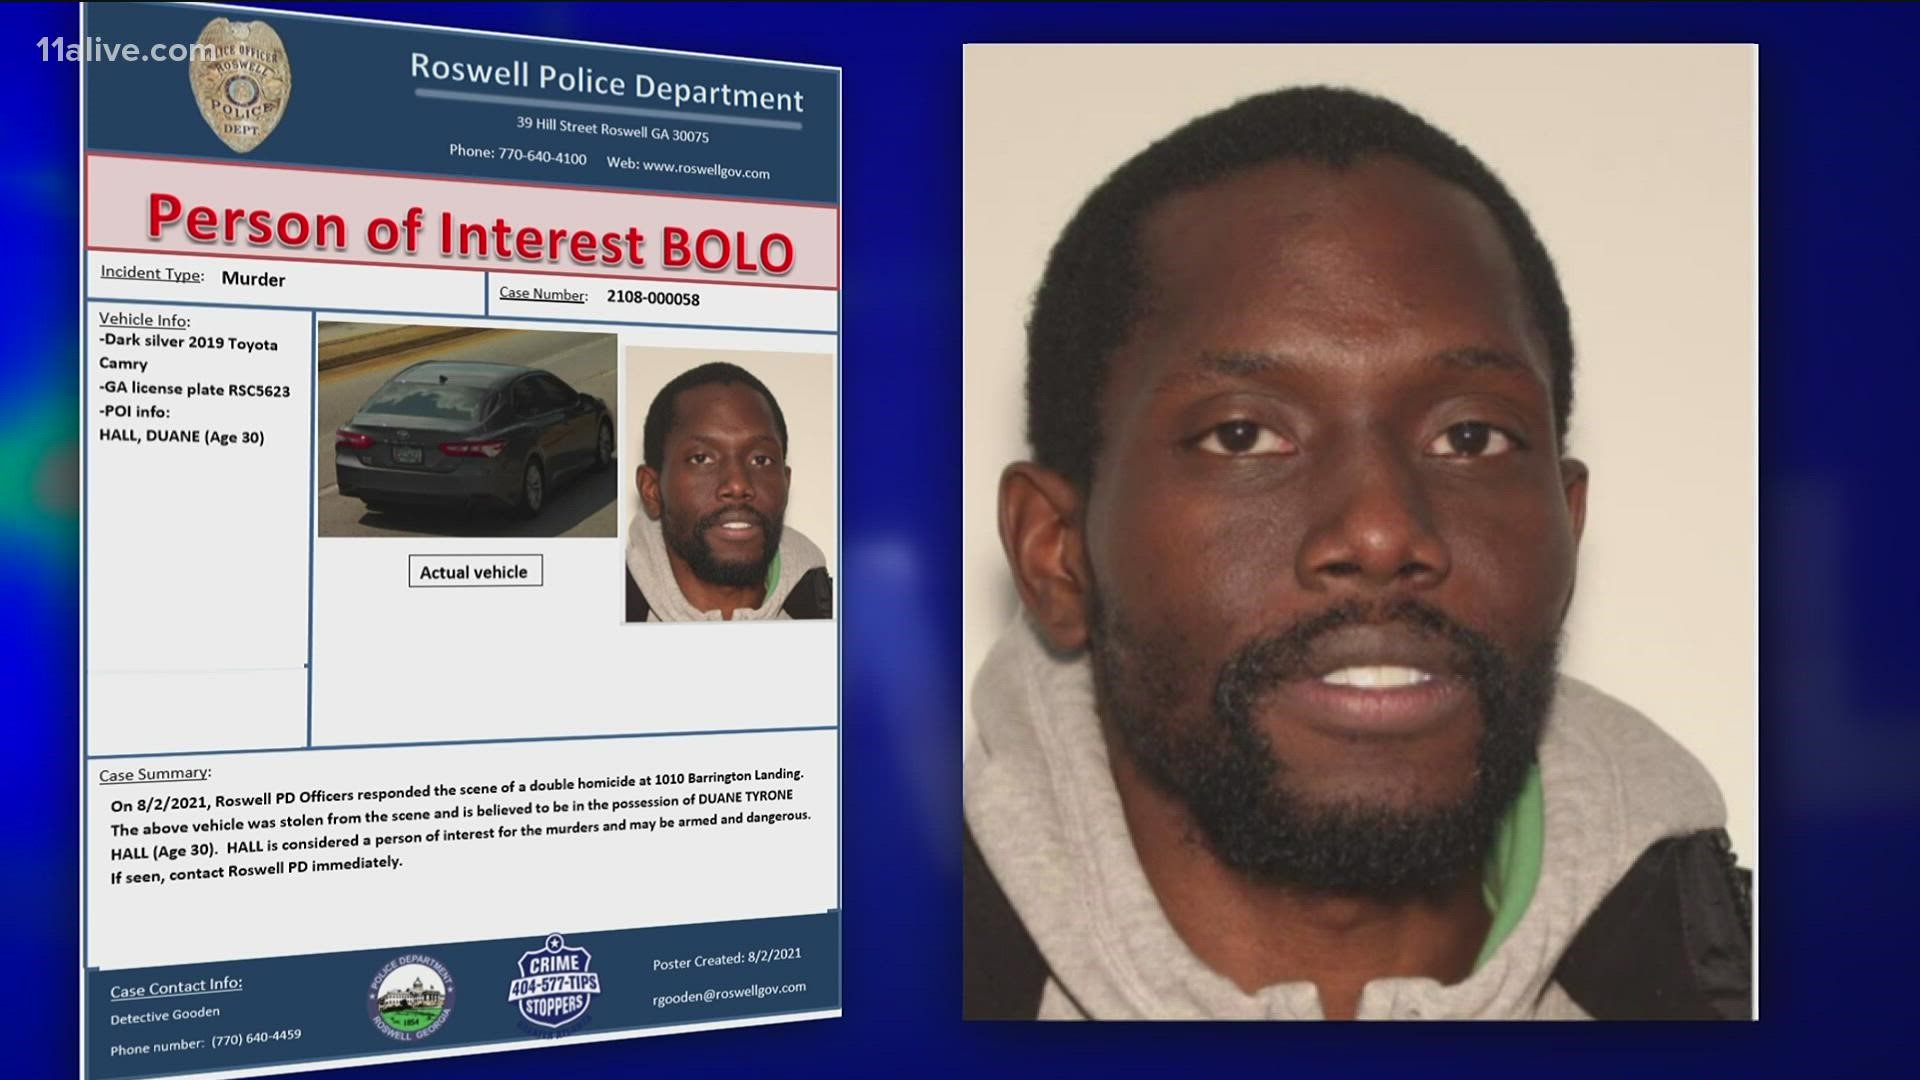 Police have named a person of interest in the case.